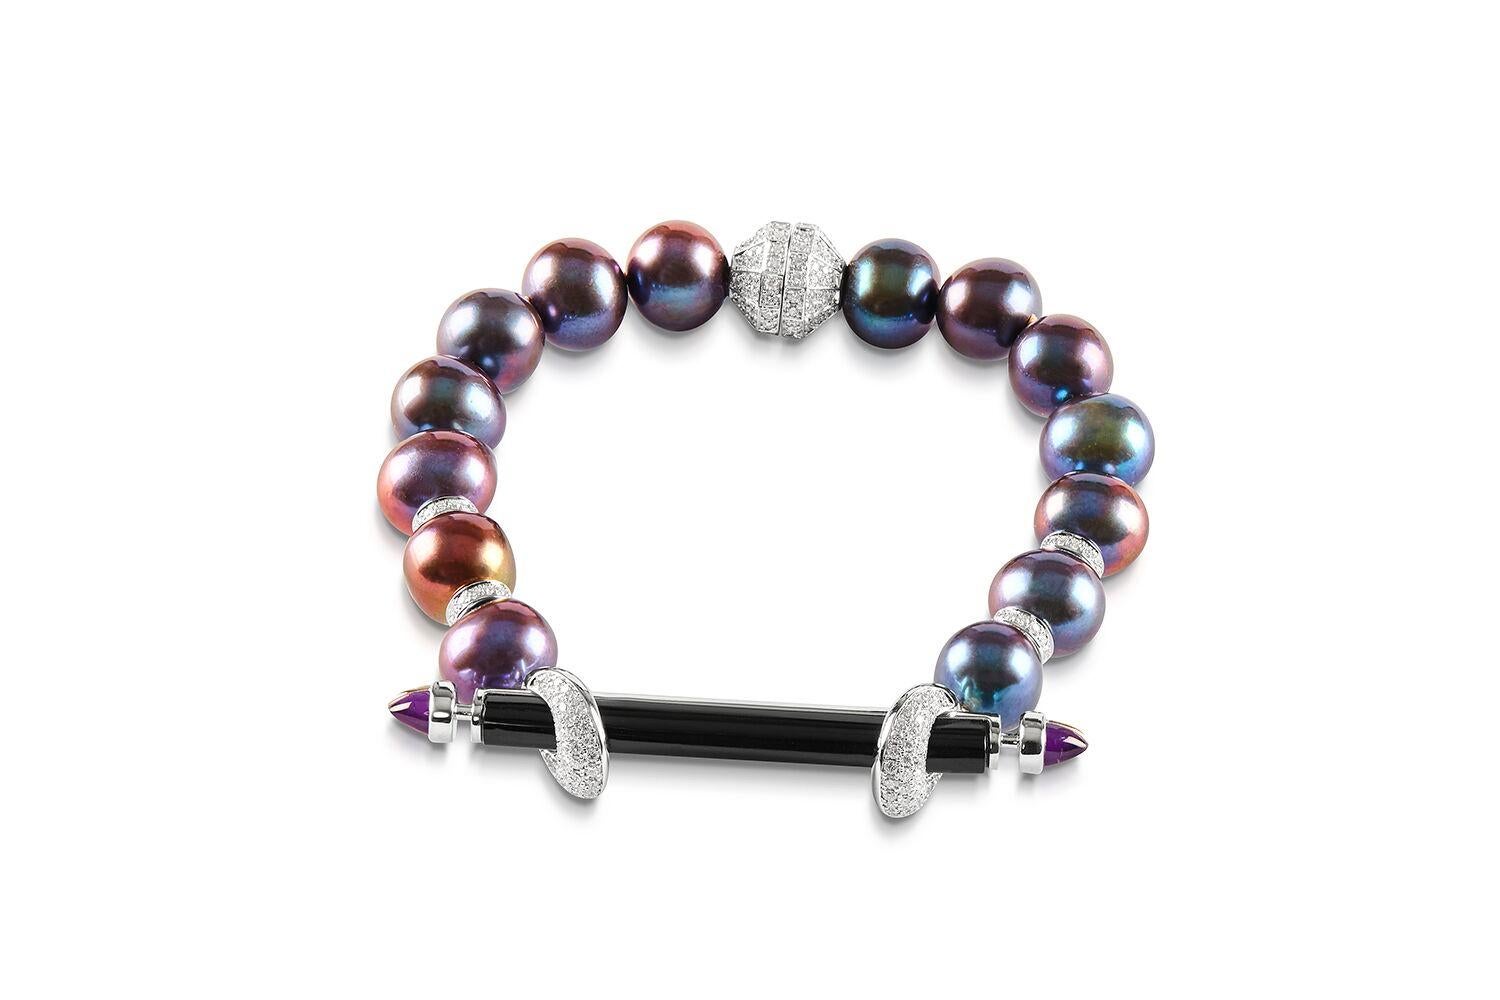 ANANYA CHAKRA BRACELET SET WITH ONYX, AMETHYST, PEARLS AND DIAMONDS


Set in 18K White gold


Total diamond weight: 1.50 ct
Color: F-G
Clarity: VVS1

Total cabochon amethyst : 0.44 ct

Black freshwater pearls
Diameter - 50 mm